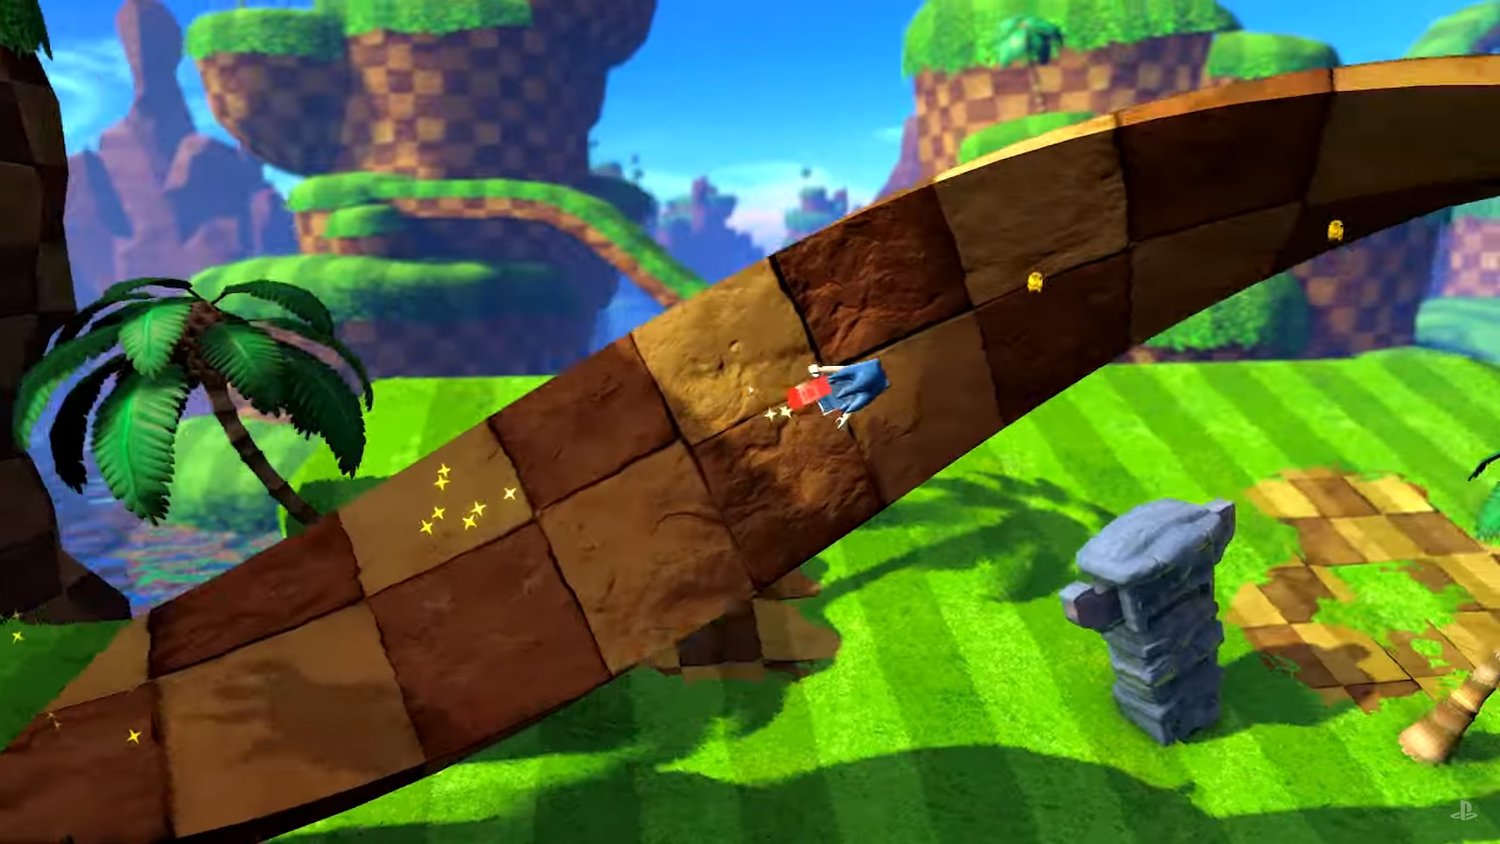 LEGO DIMENSIONS SONIC Level Pack Looks To Be Its Most Impressive Yet —  GameTyrant